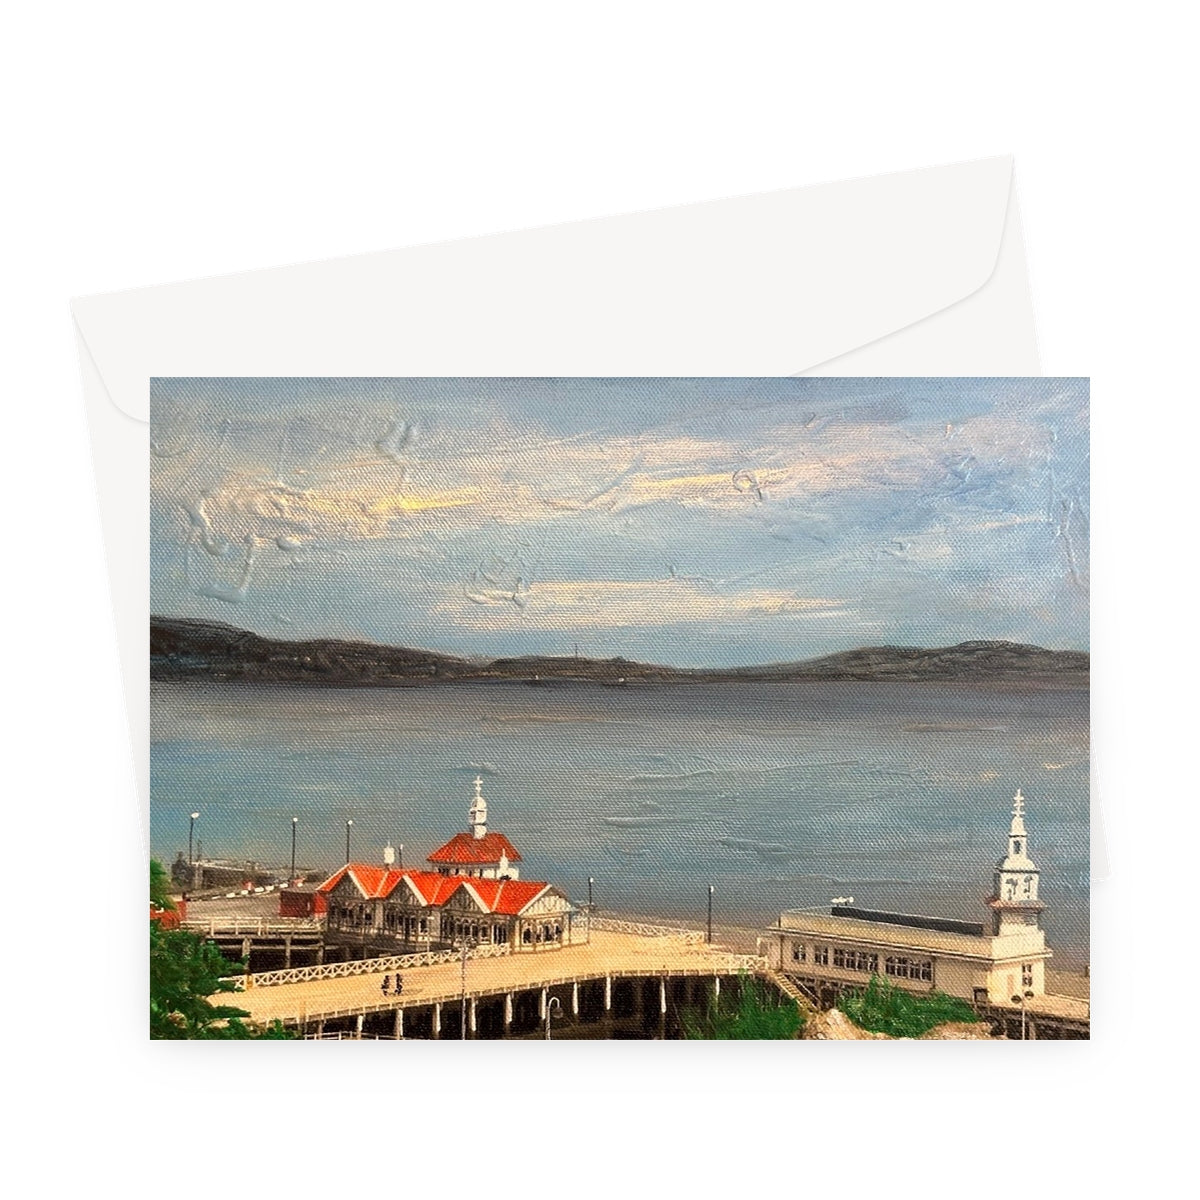 Looking From Dunoon Art Gifts Greeting Card-Stationery-River Clyde Art Gallery-A5 Landscape-1 Card-Paintings, Prints, Homeware, Art Gifts From Scotland By Scottish Artist Kevin Hunter